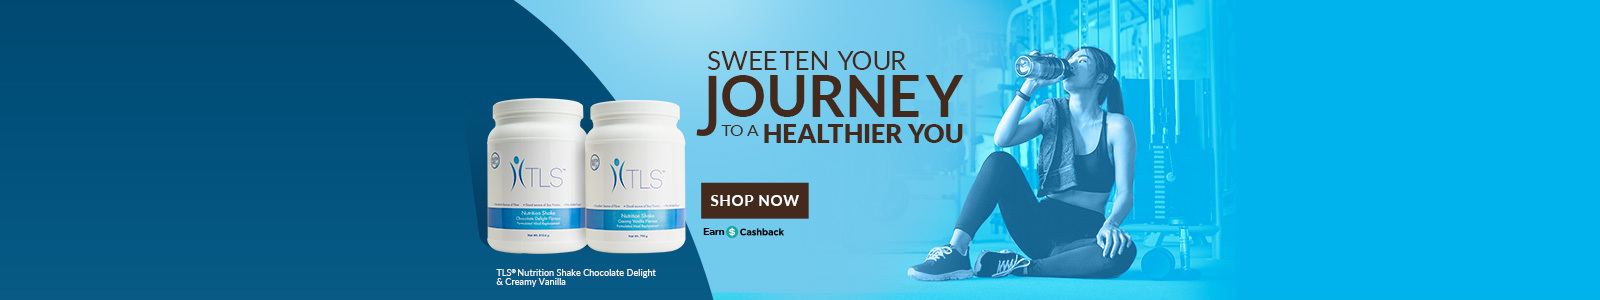 TLS Nutrition Shakes. Sweeten Your Journey to a Healthier You. Shop Now. earn cashback